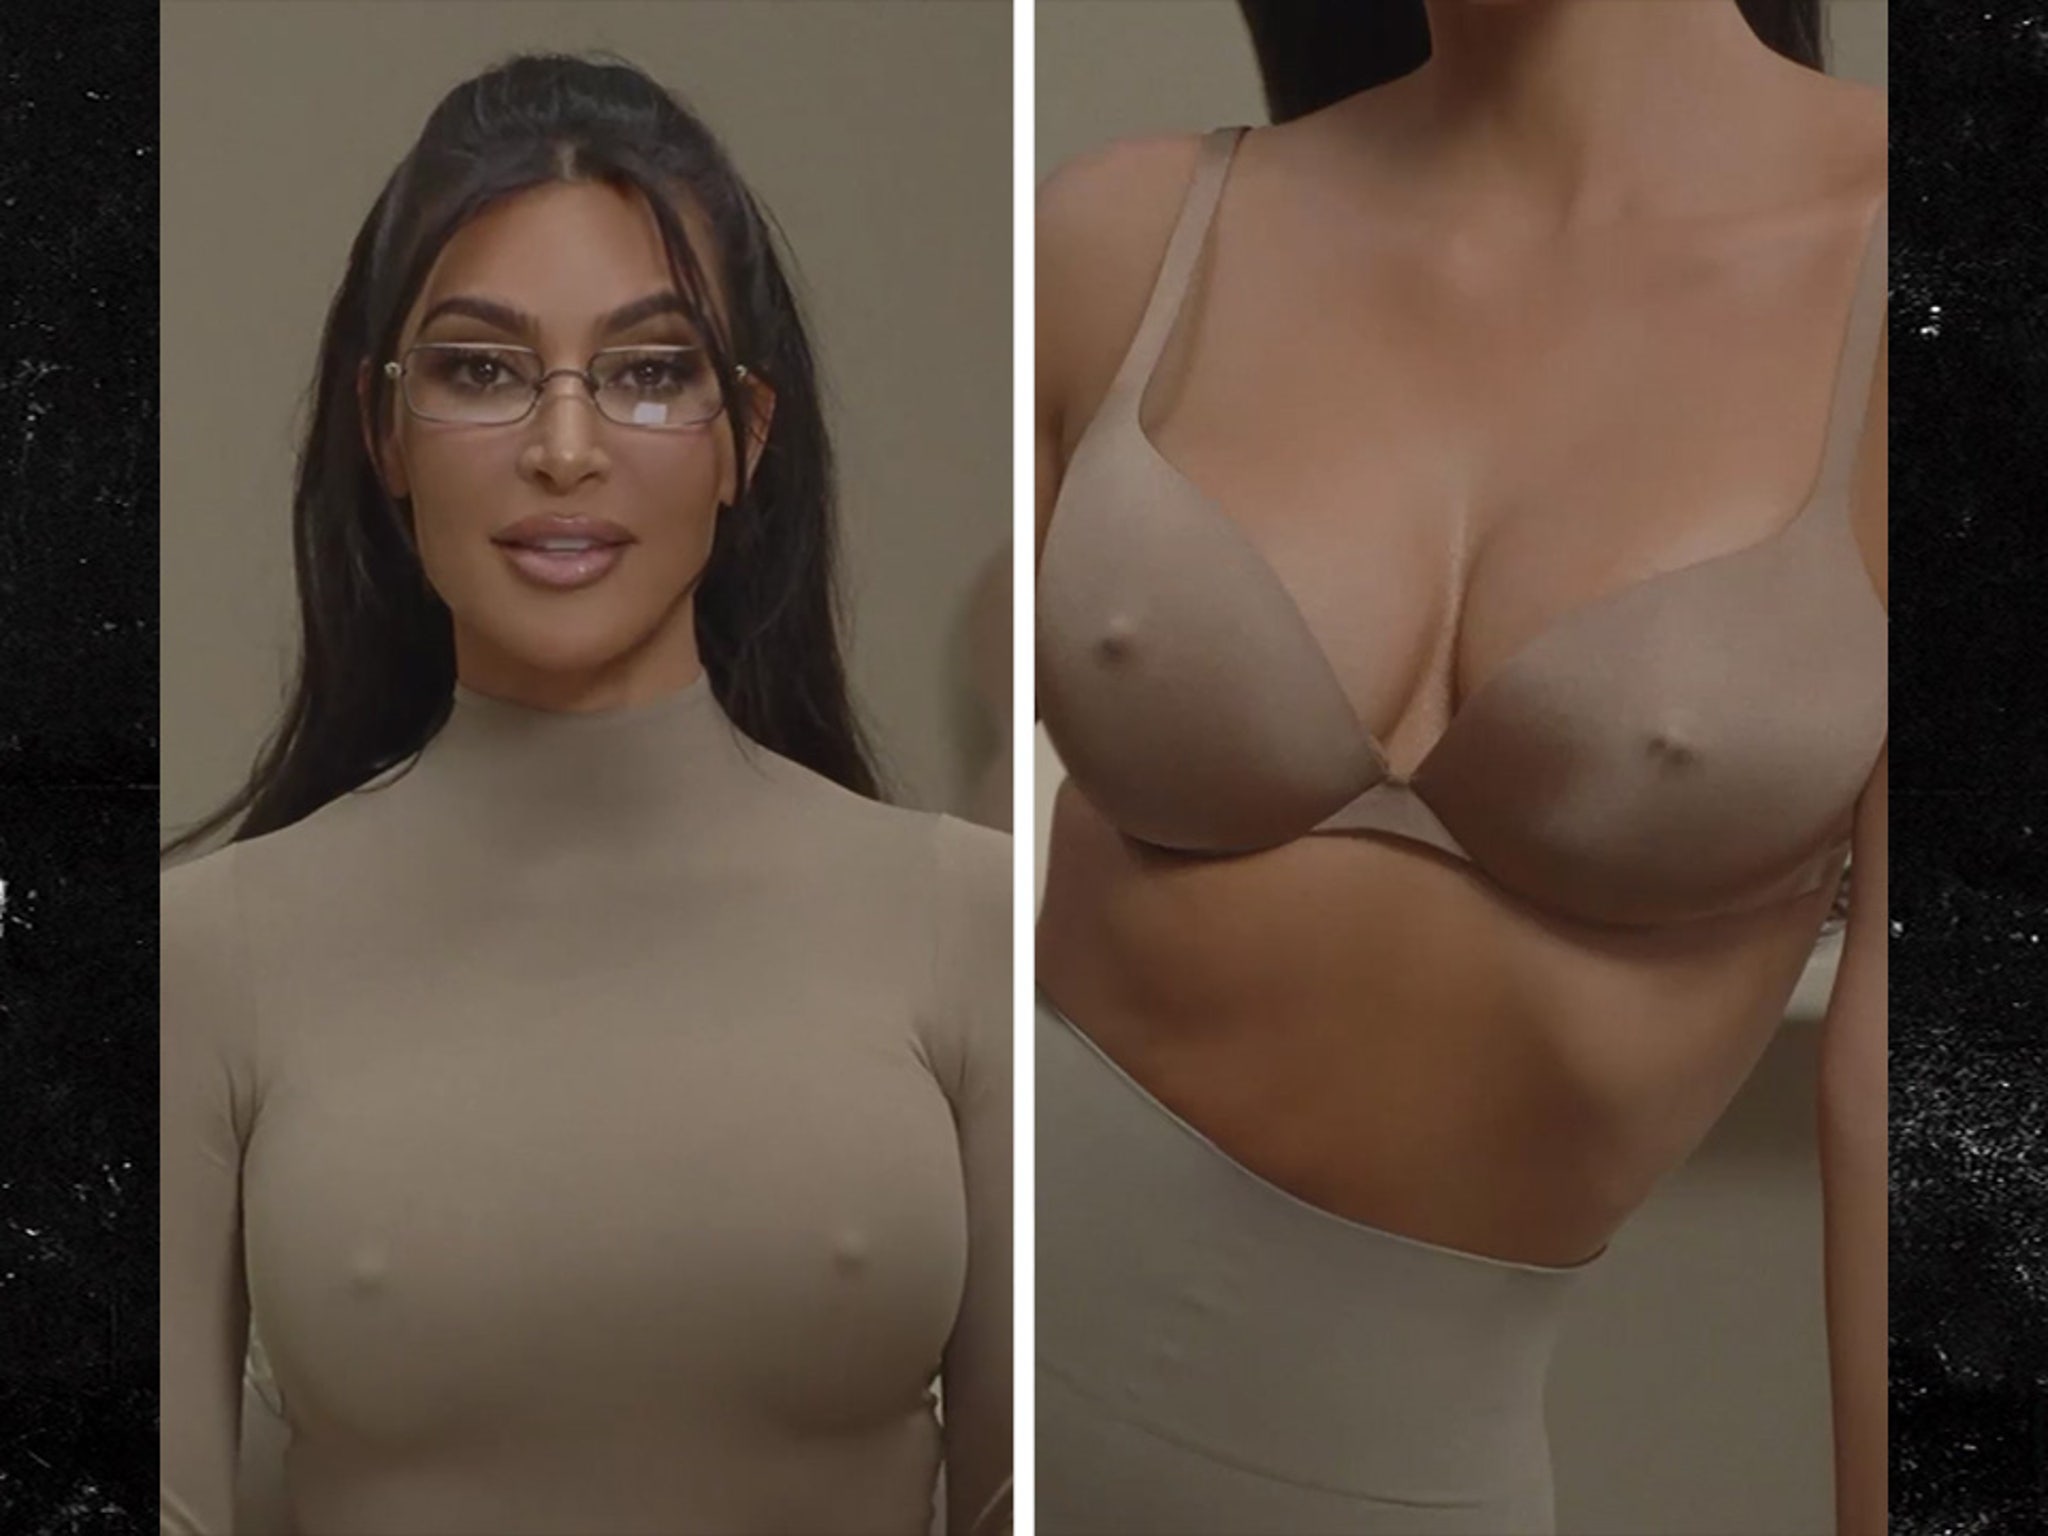 This month, Kim Kardashian's lounge and lingerie brand Skims announced the  release of a new bra with fake nipples to imitate the effect of…